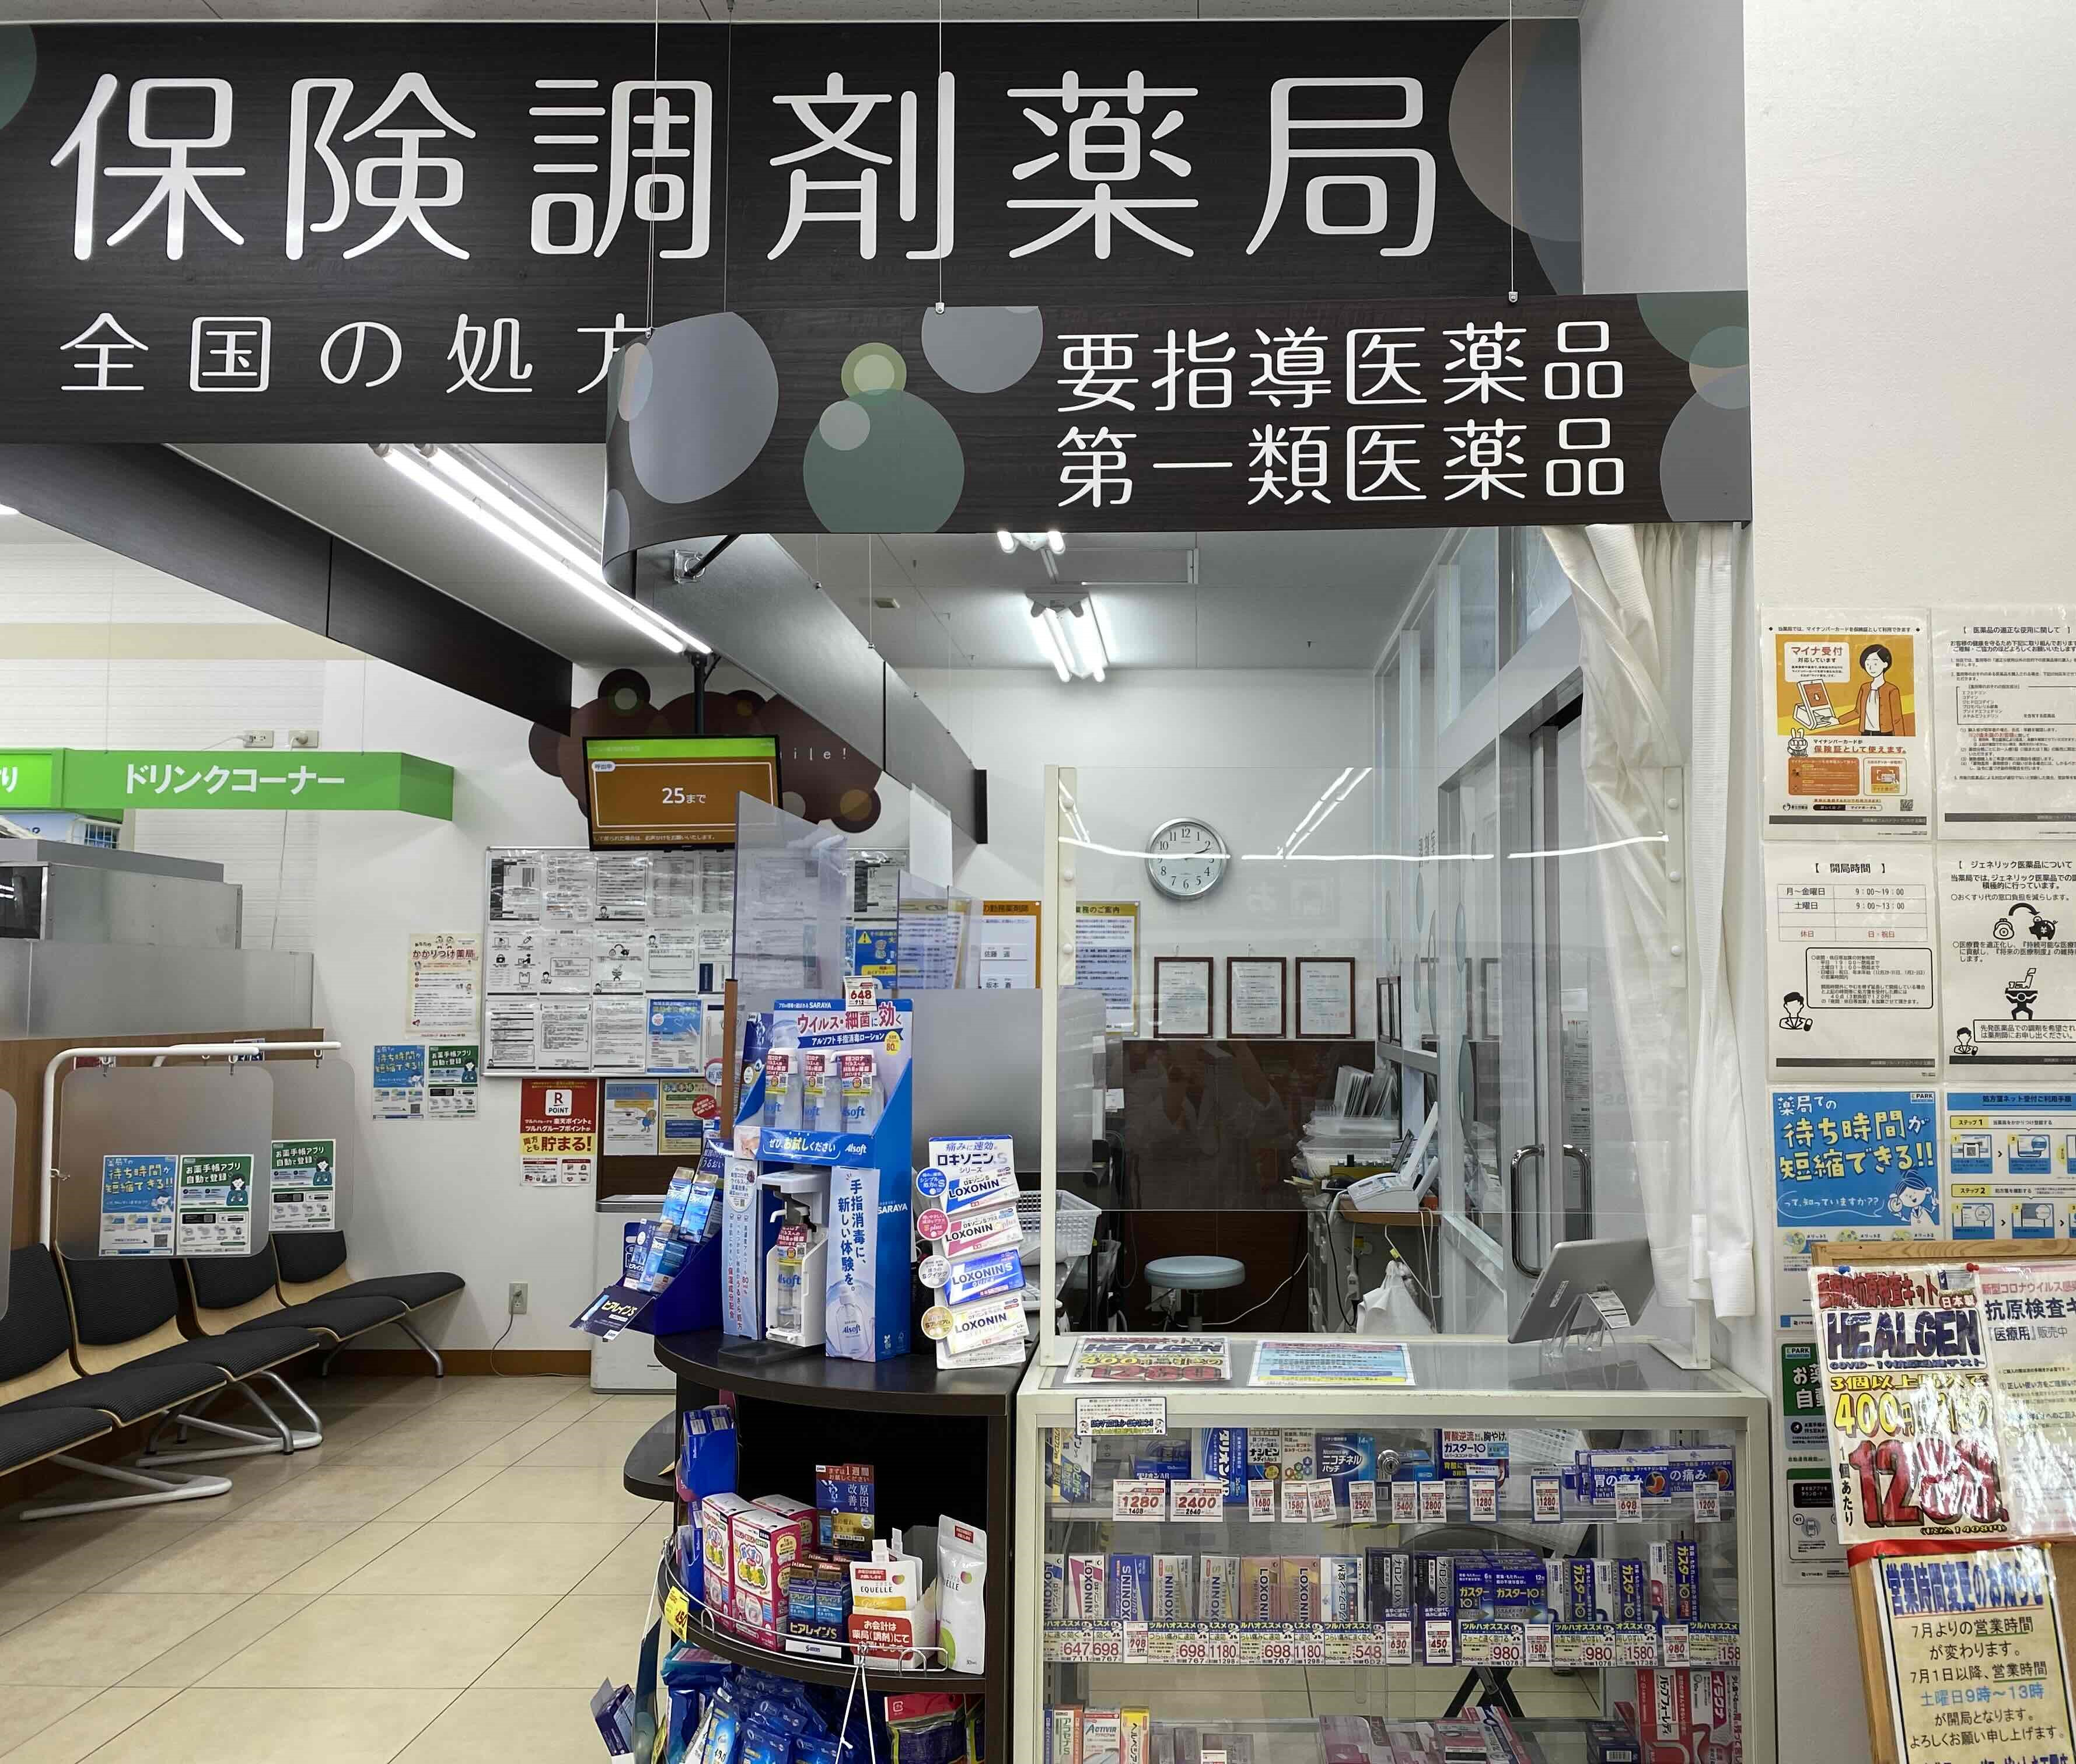 Images 調剤薬局ツルハドラッグ いわき玉露店